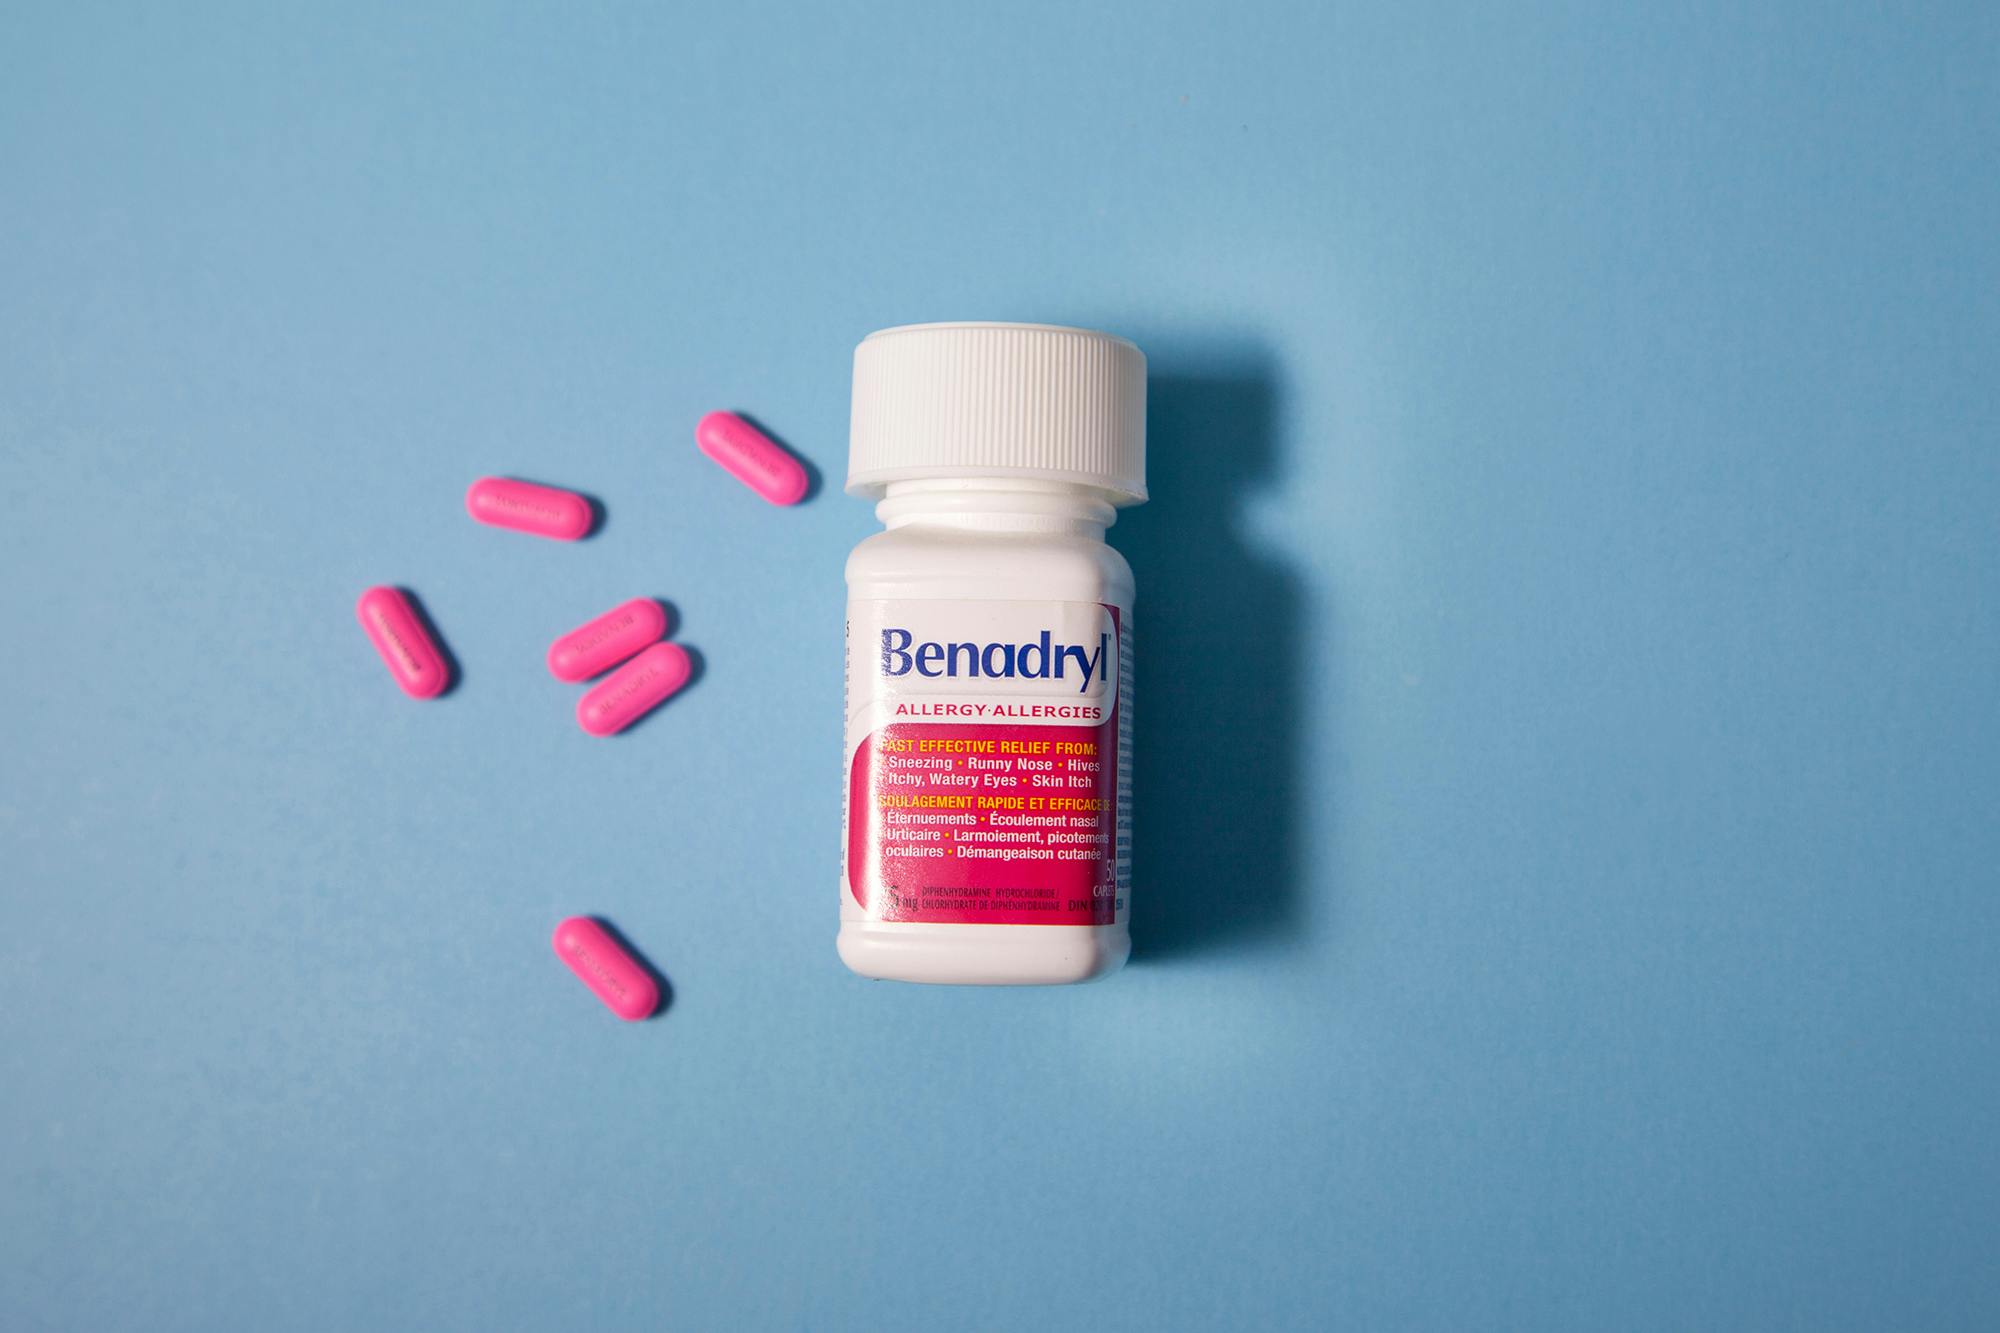 Benadryl is a drug that helps with allergies